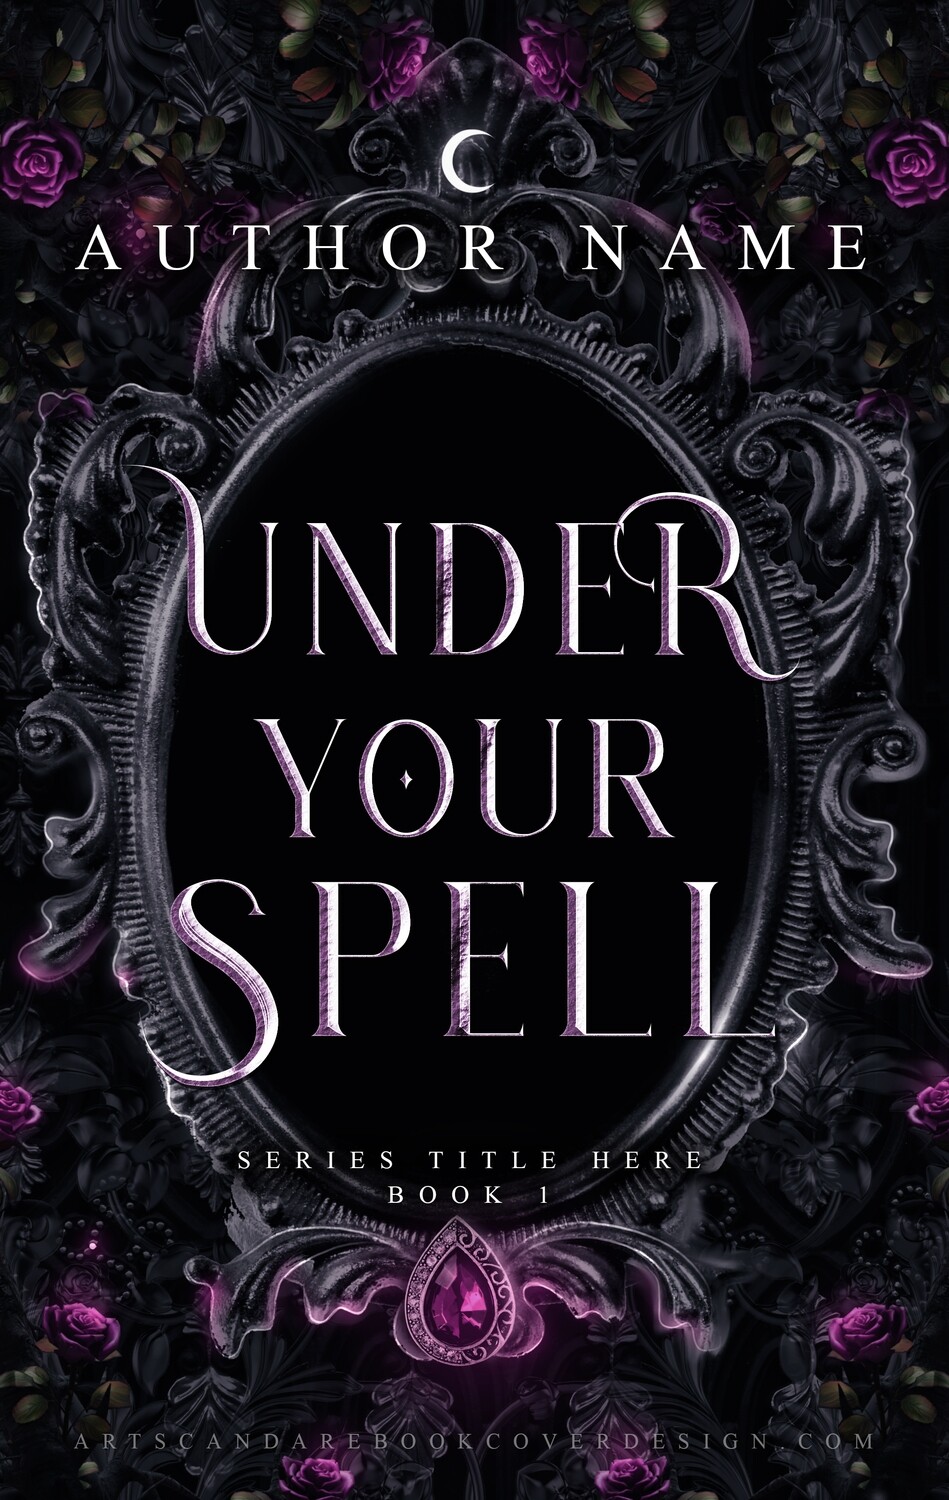 UNDER YOUR SPELL